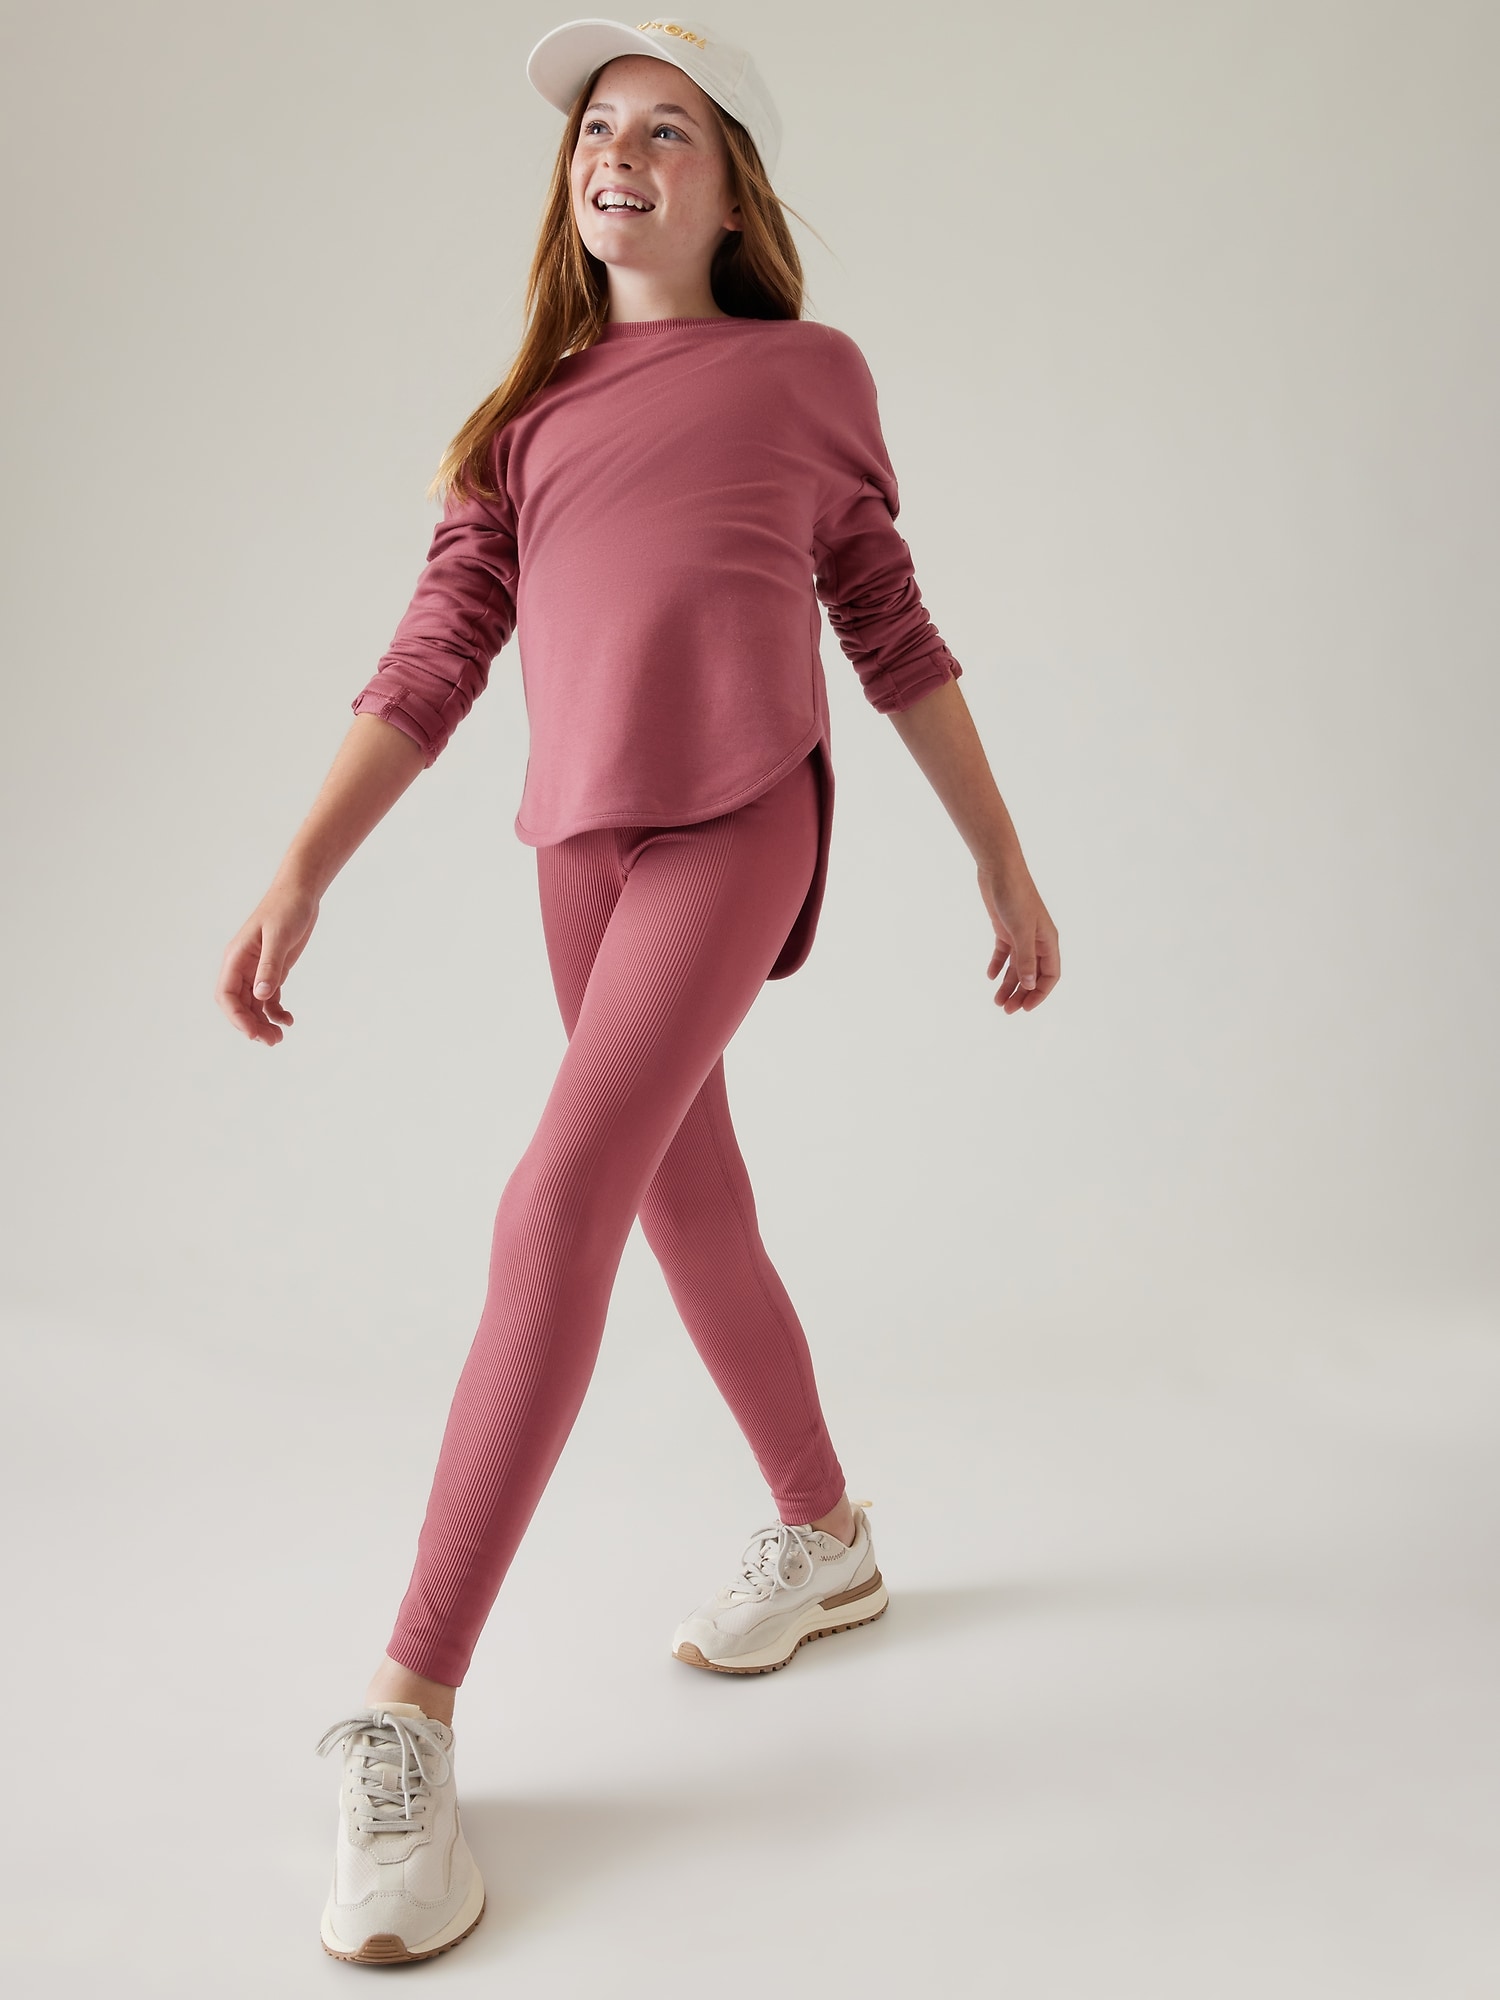 Athleta NWT Elation Rib Trim 7/8 Tight Leggings - Size 3X Pink - $75 (15%  Off Retail) New With Tags - From Sarah